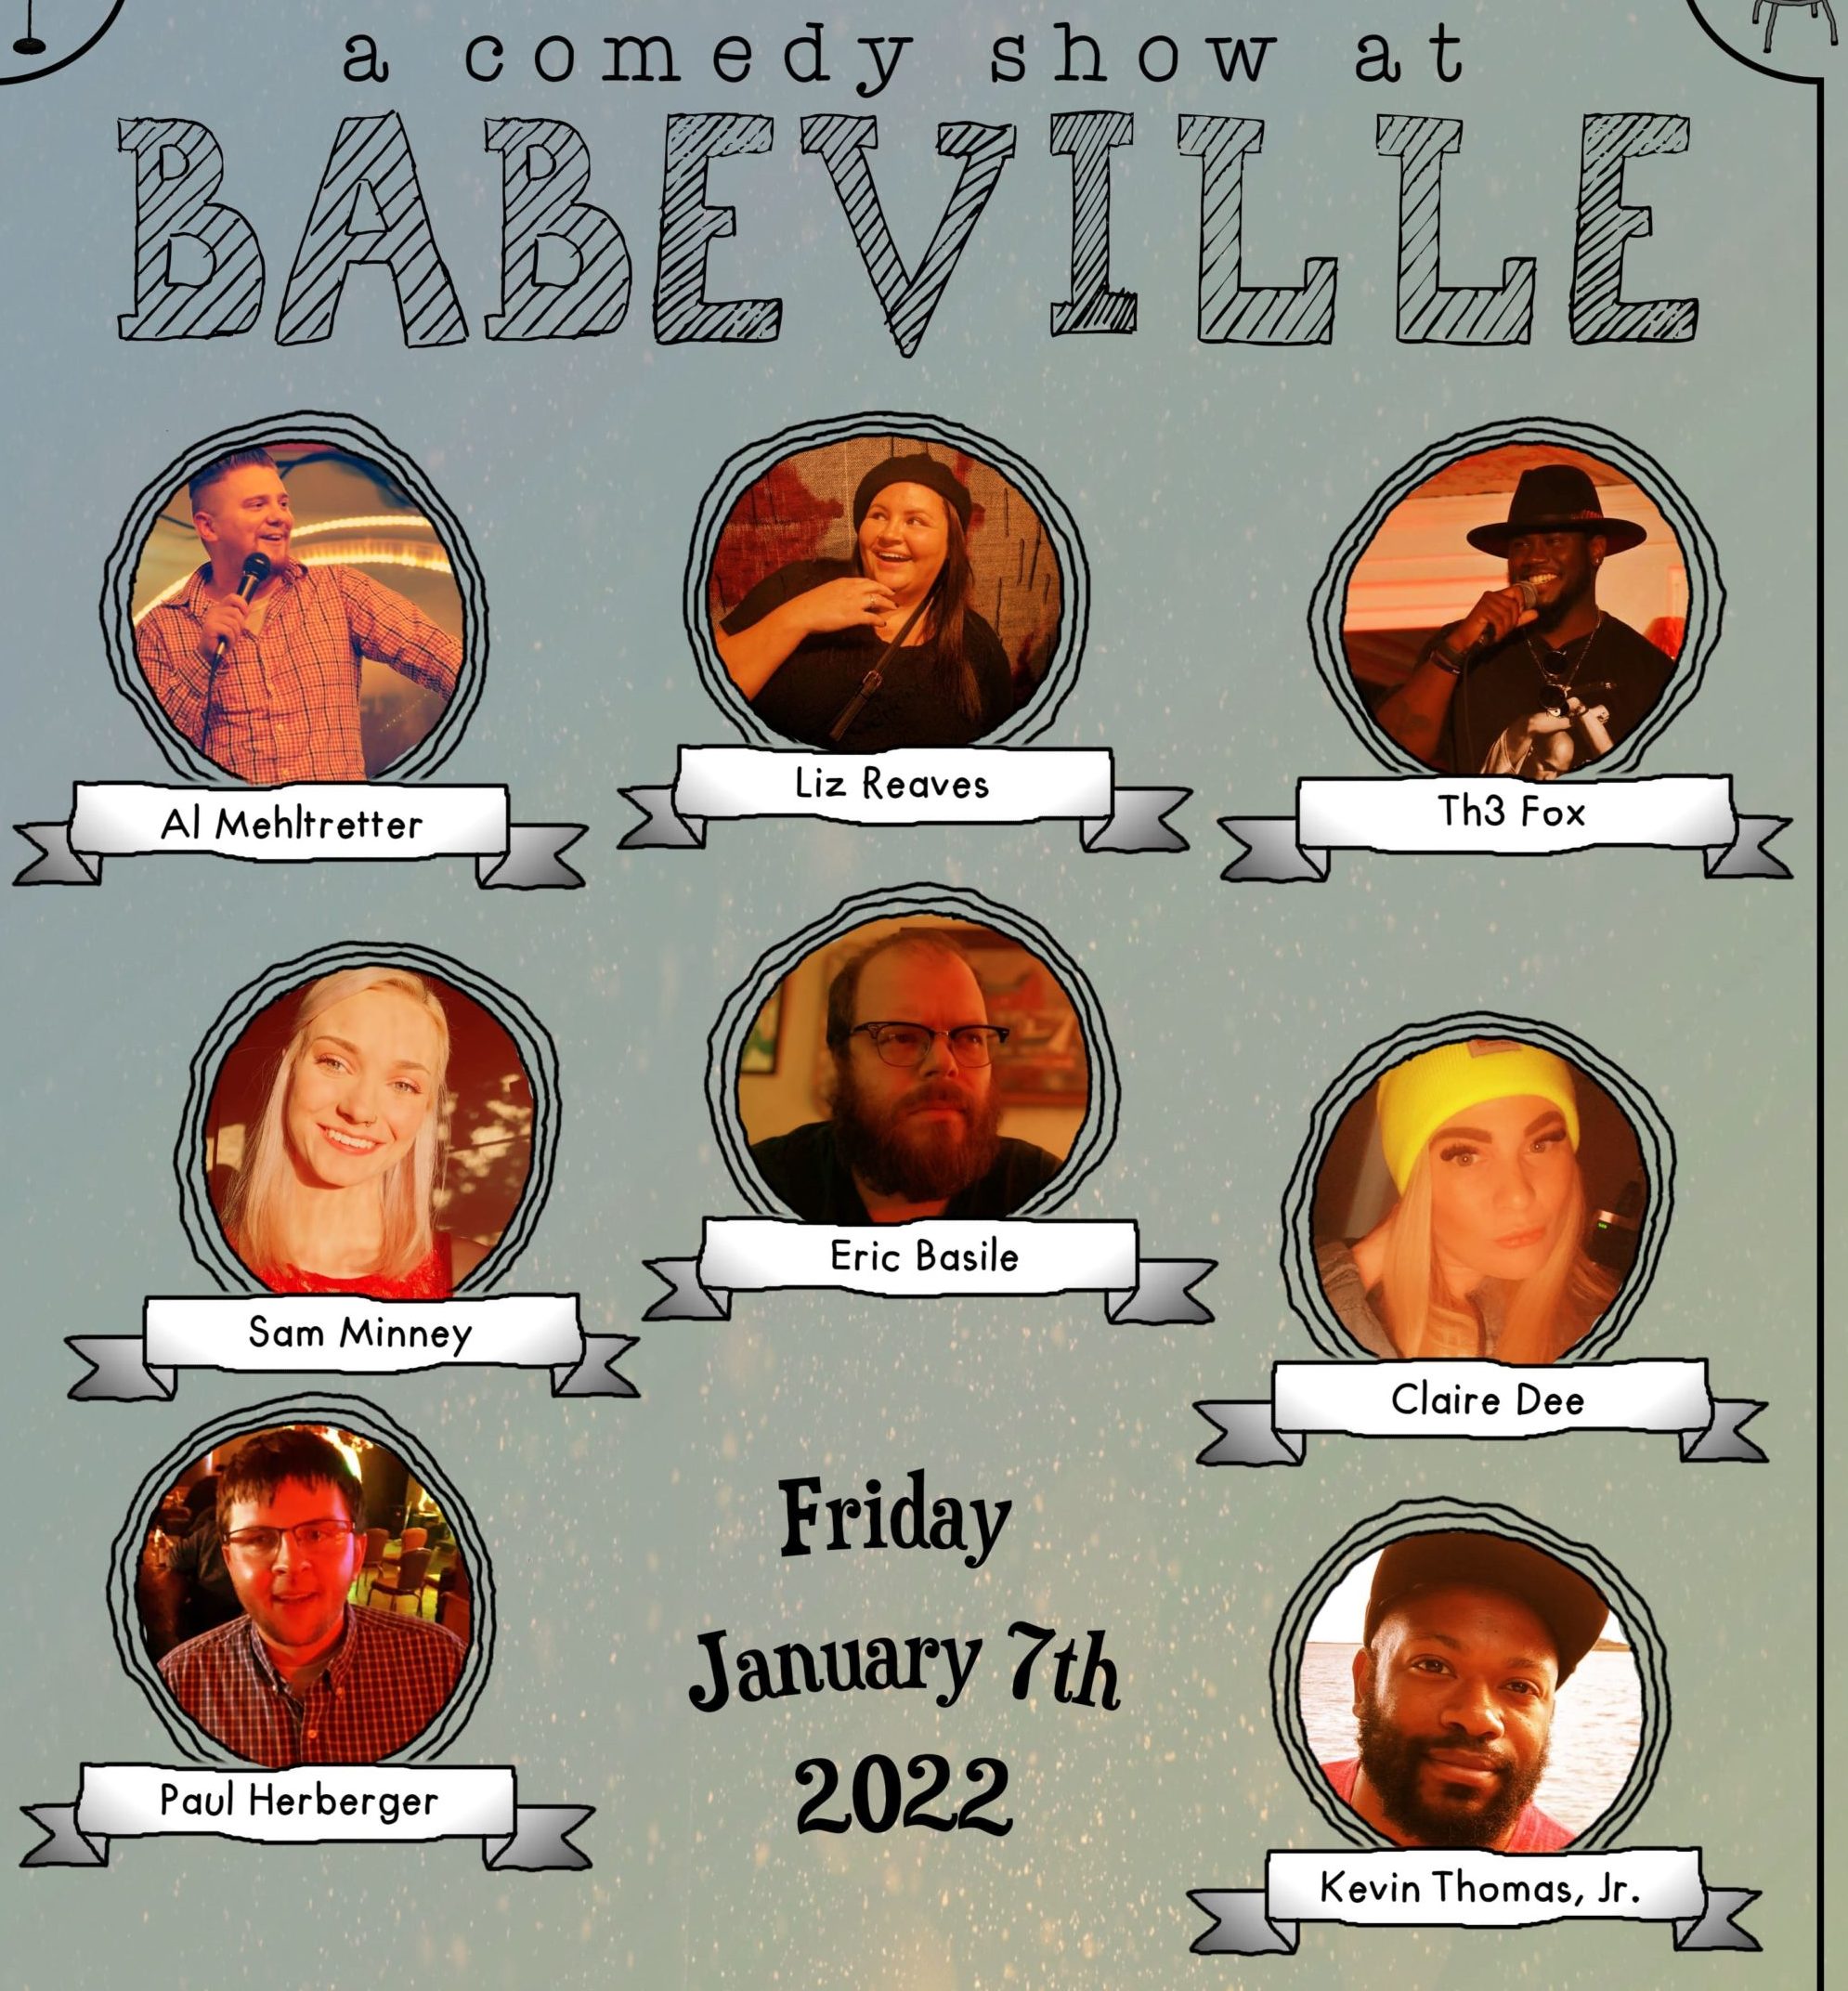 A Comedy Show at Babeville